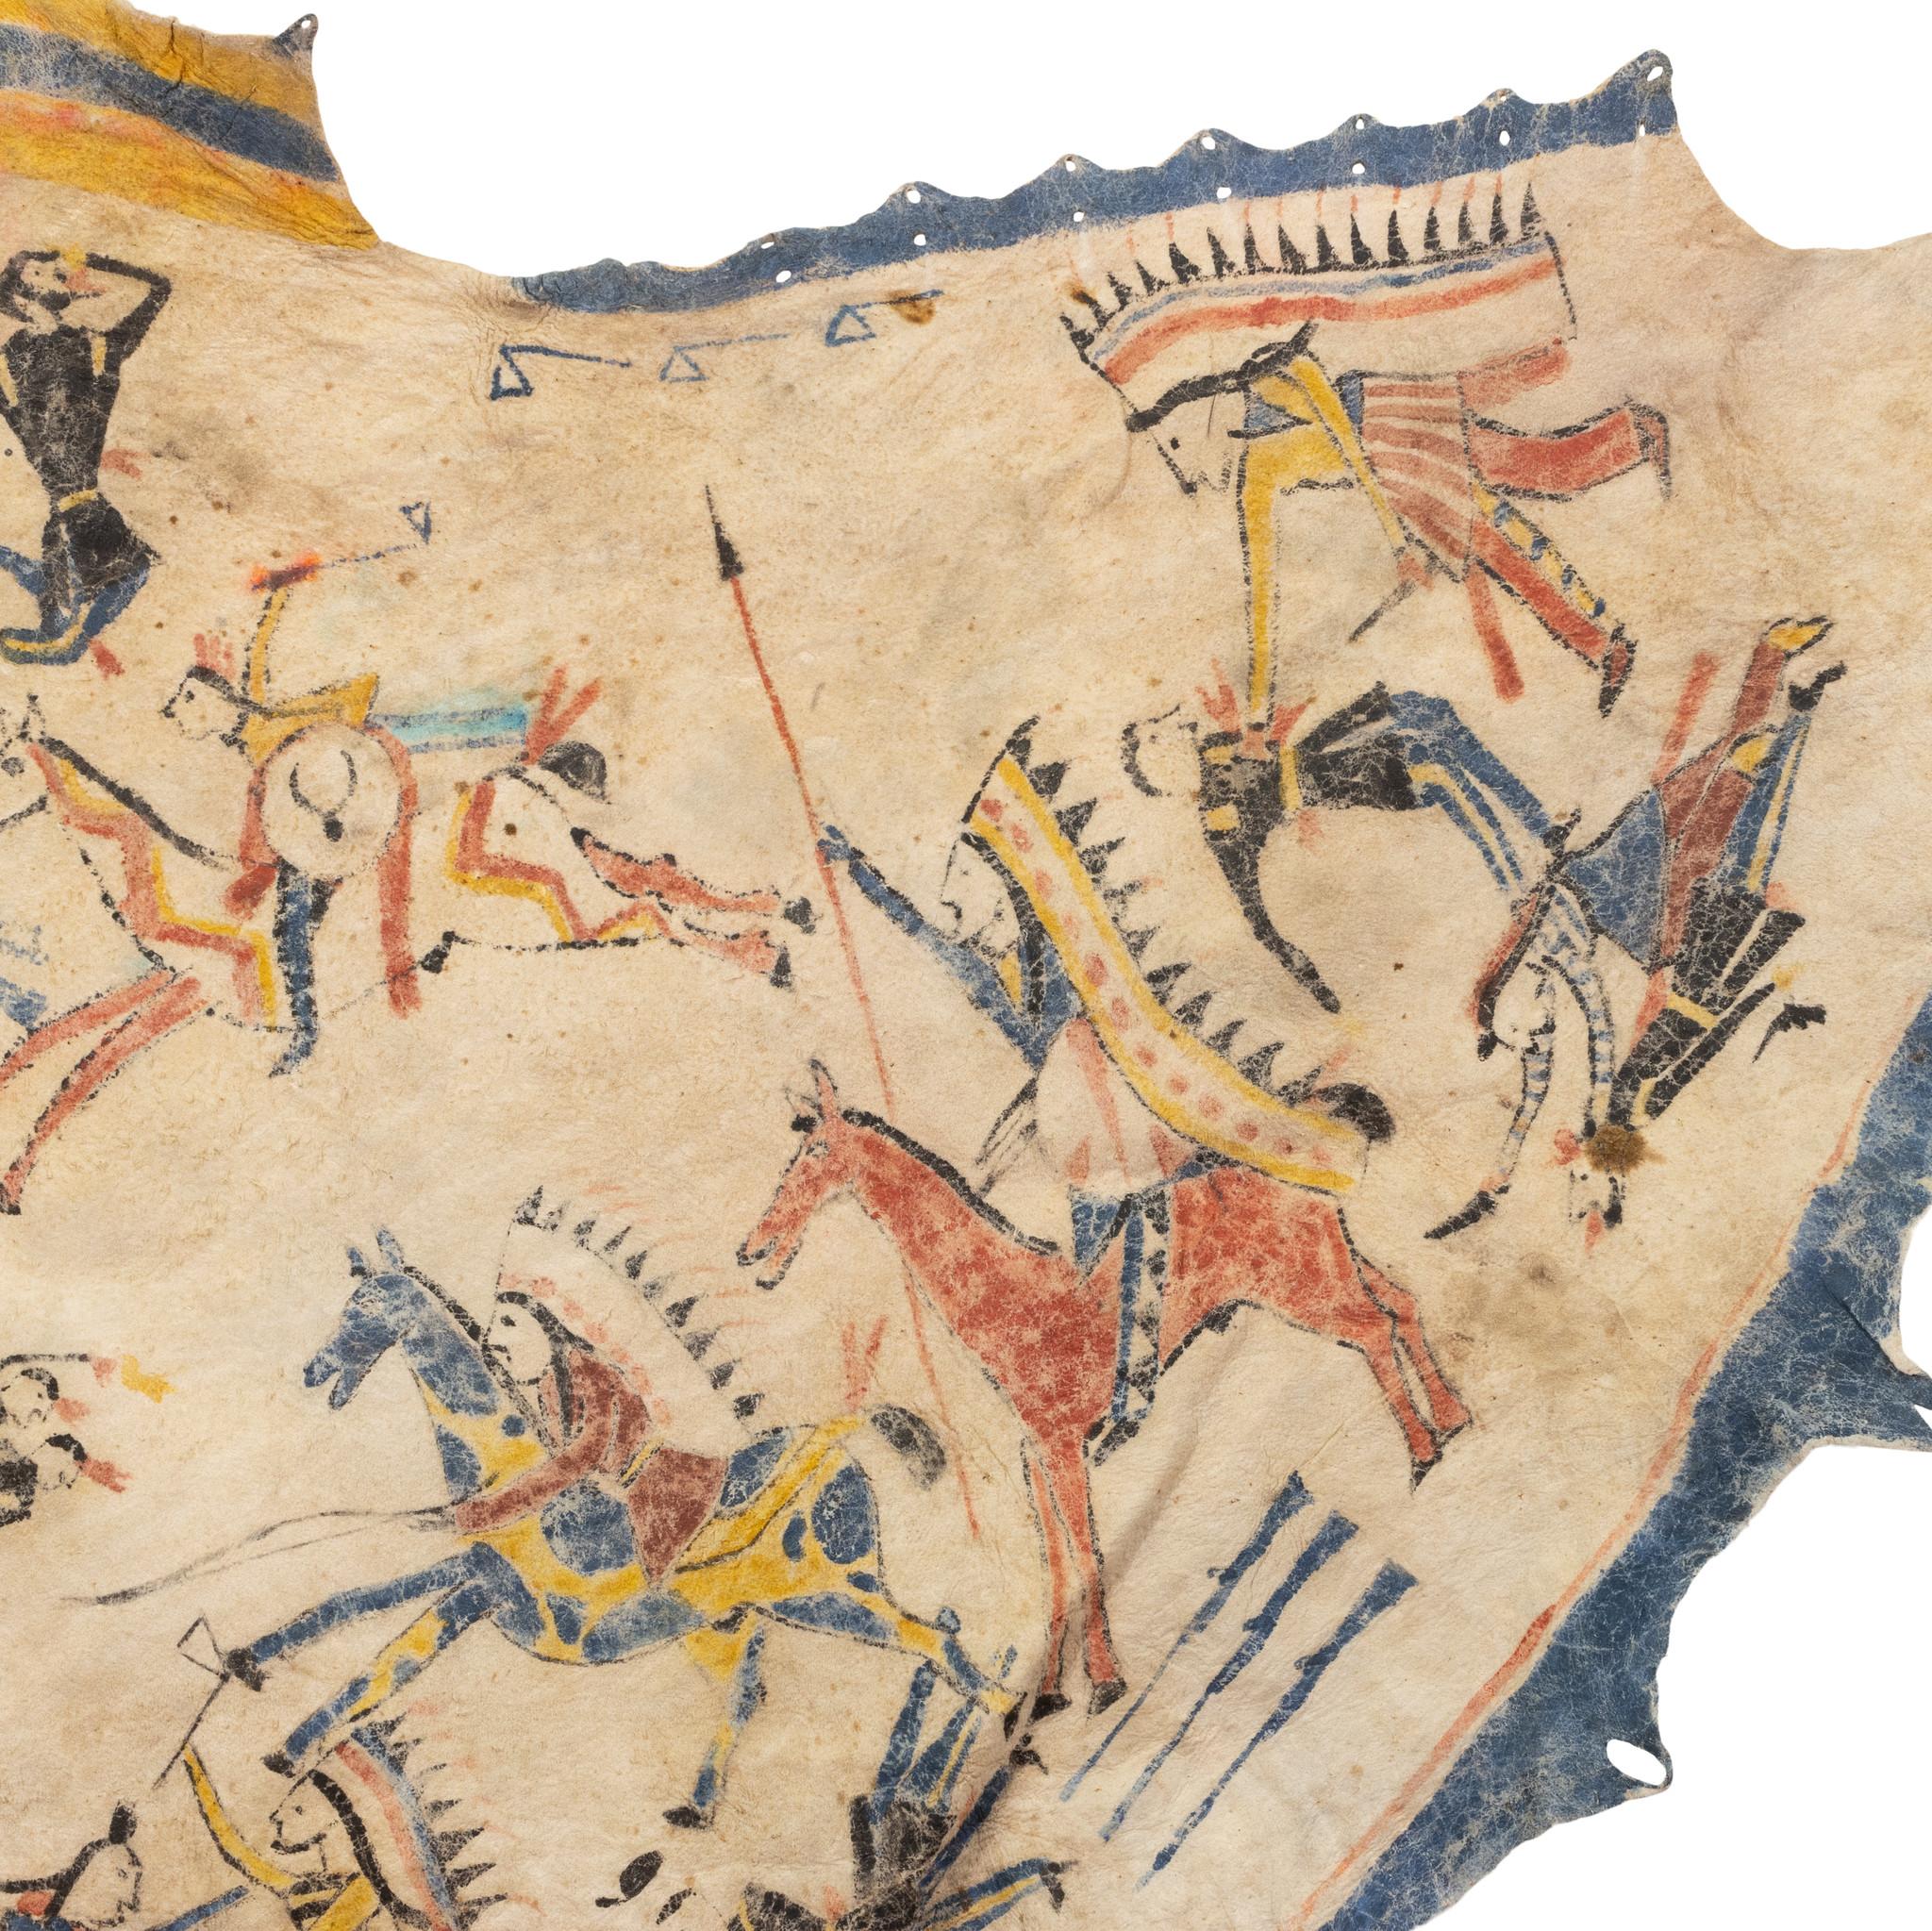 Child's teepee depicting highly graphic battle scene painted on brain tanned deer skin. This piece was acquired from Wilma Silvey, age 89, in 2005, white woman, was handed down through her husband's family, Joseph Silvey (Silverfish). His father was